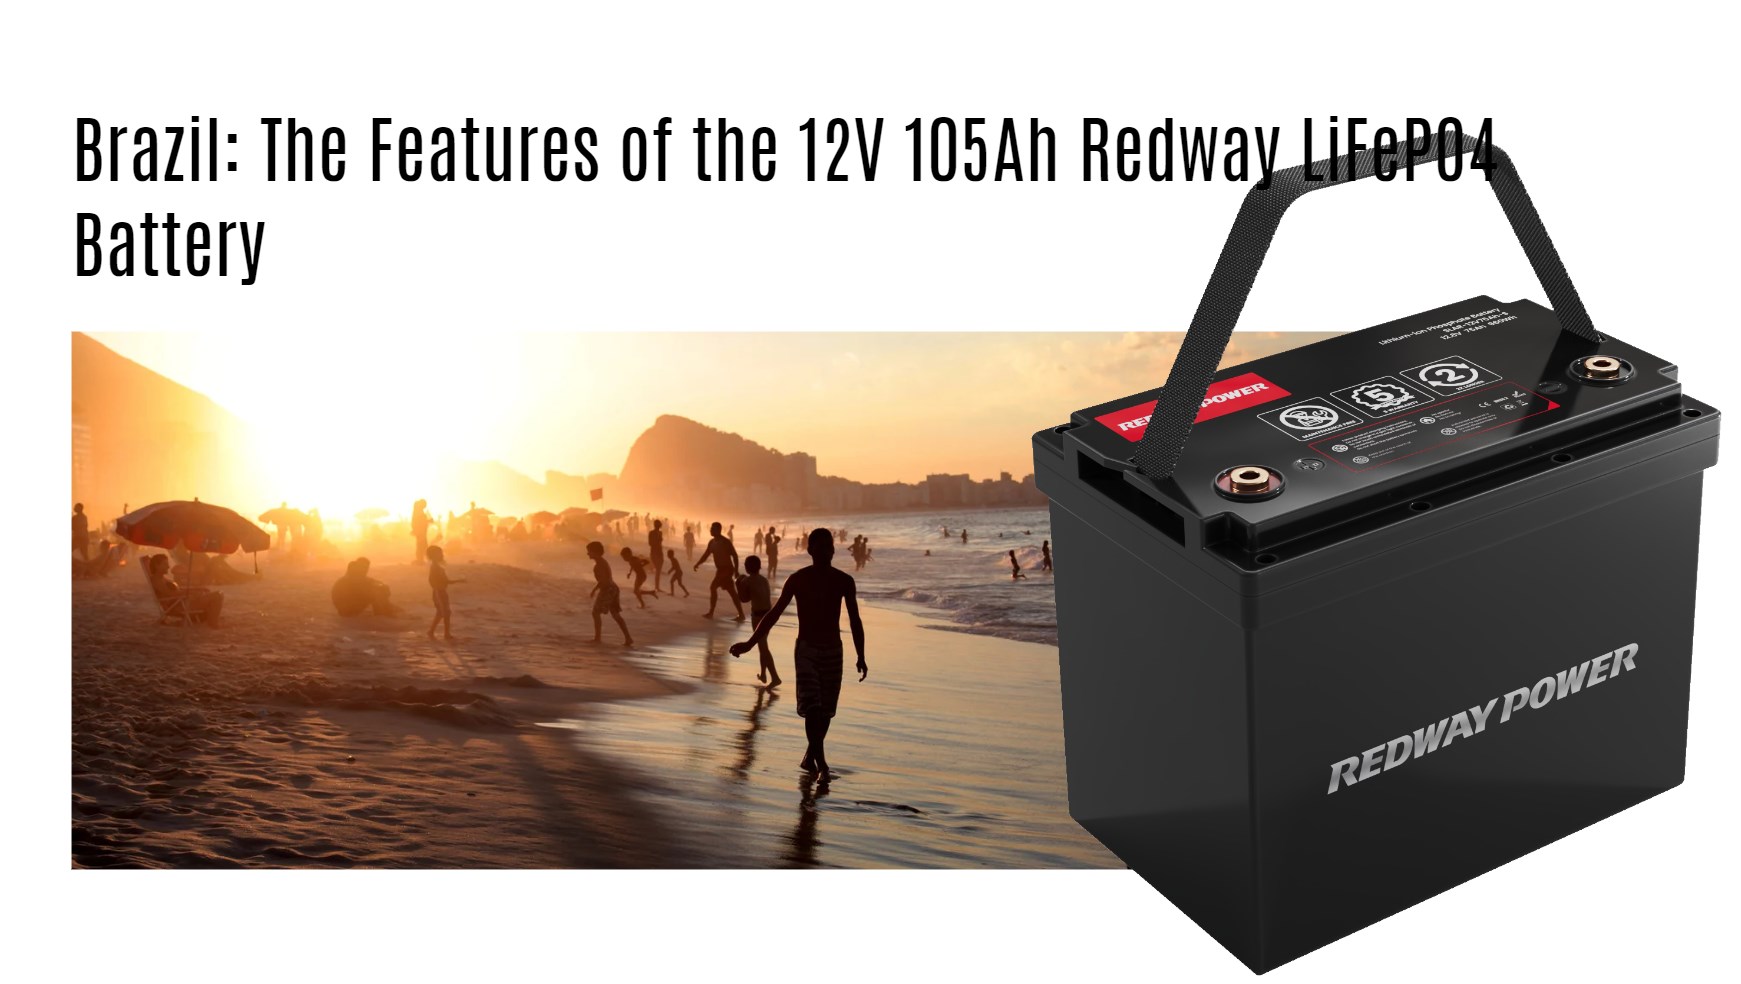 The Features of the 12V 105Ah Redway LiFePO4 Battery